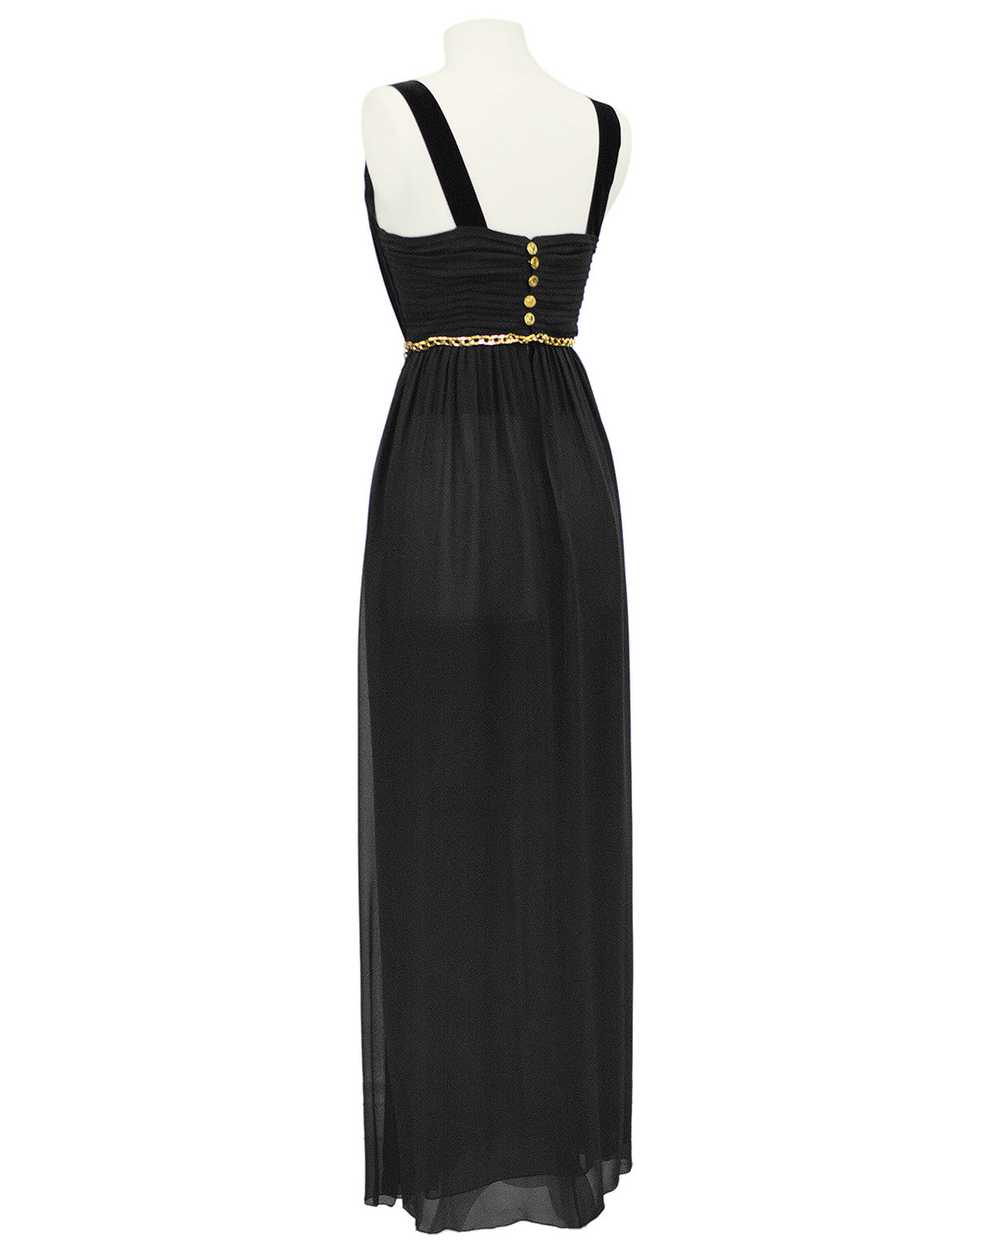 Chanel Black Chiffon Gown with Gold Chain Belt - image 2